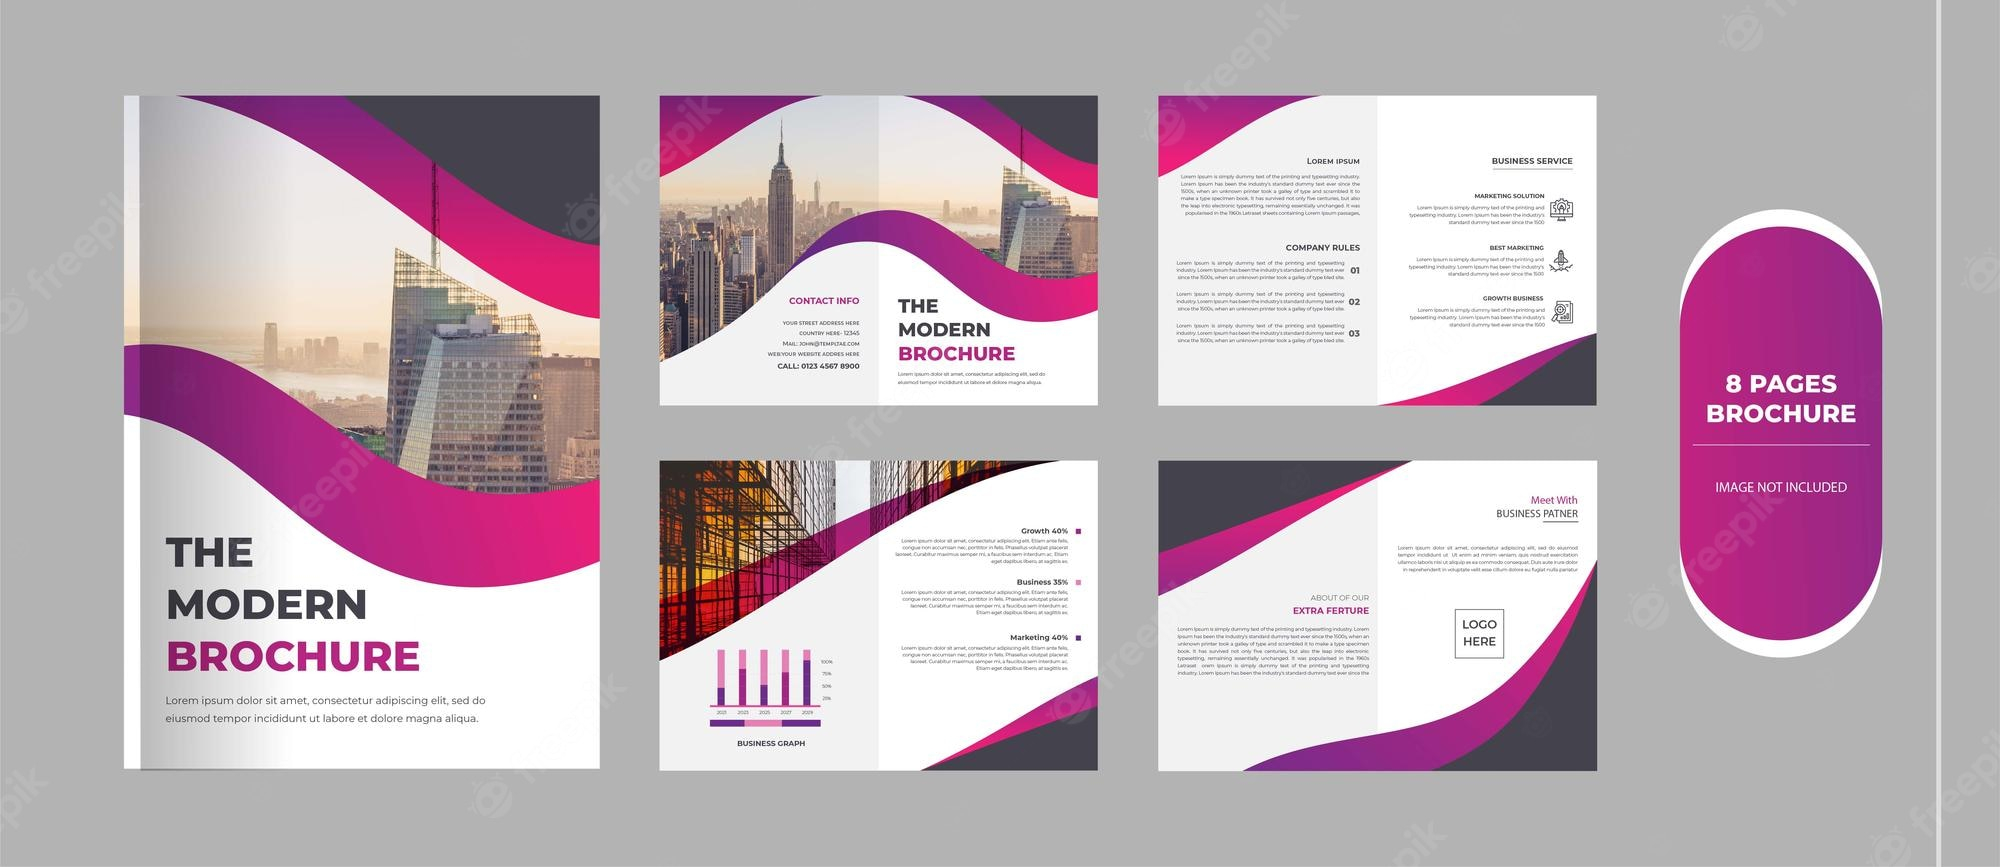 Page 10  10 fold brochure Images  Free Vectors, Stock Photos & PSD Pertaining To 2 Fold Brochure Template Free